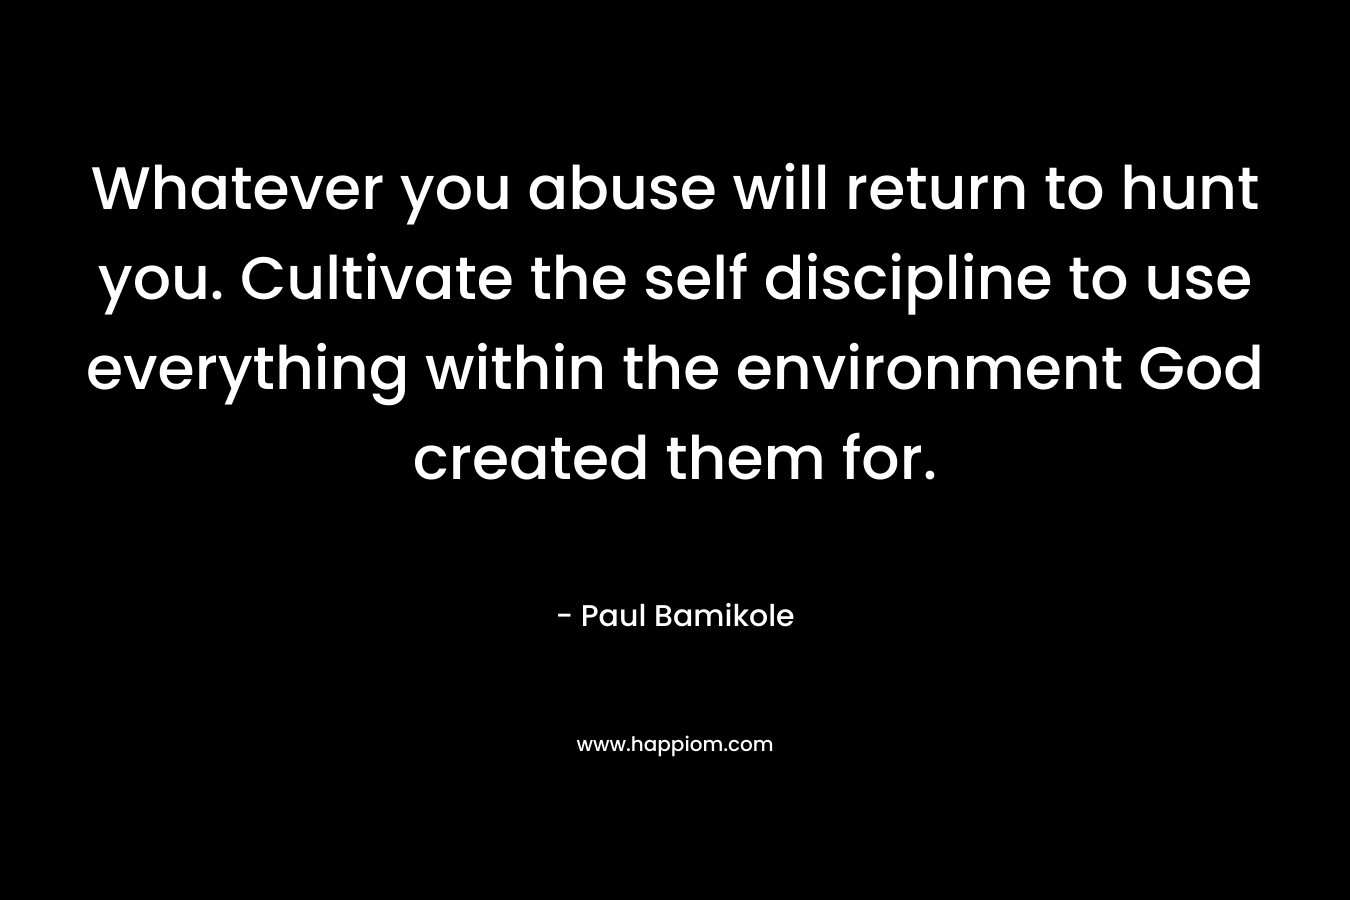 Whatever you abuse will return to hunt you. Cultivate the self discipline to use everything within the environment God created them for. – Paul Bamikole